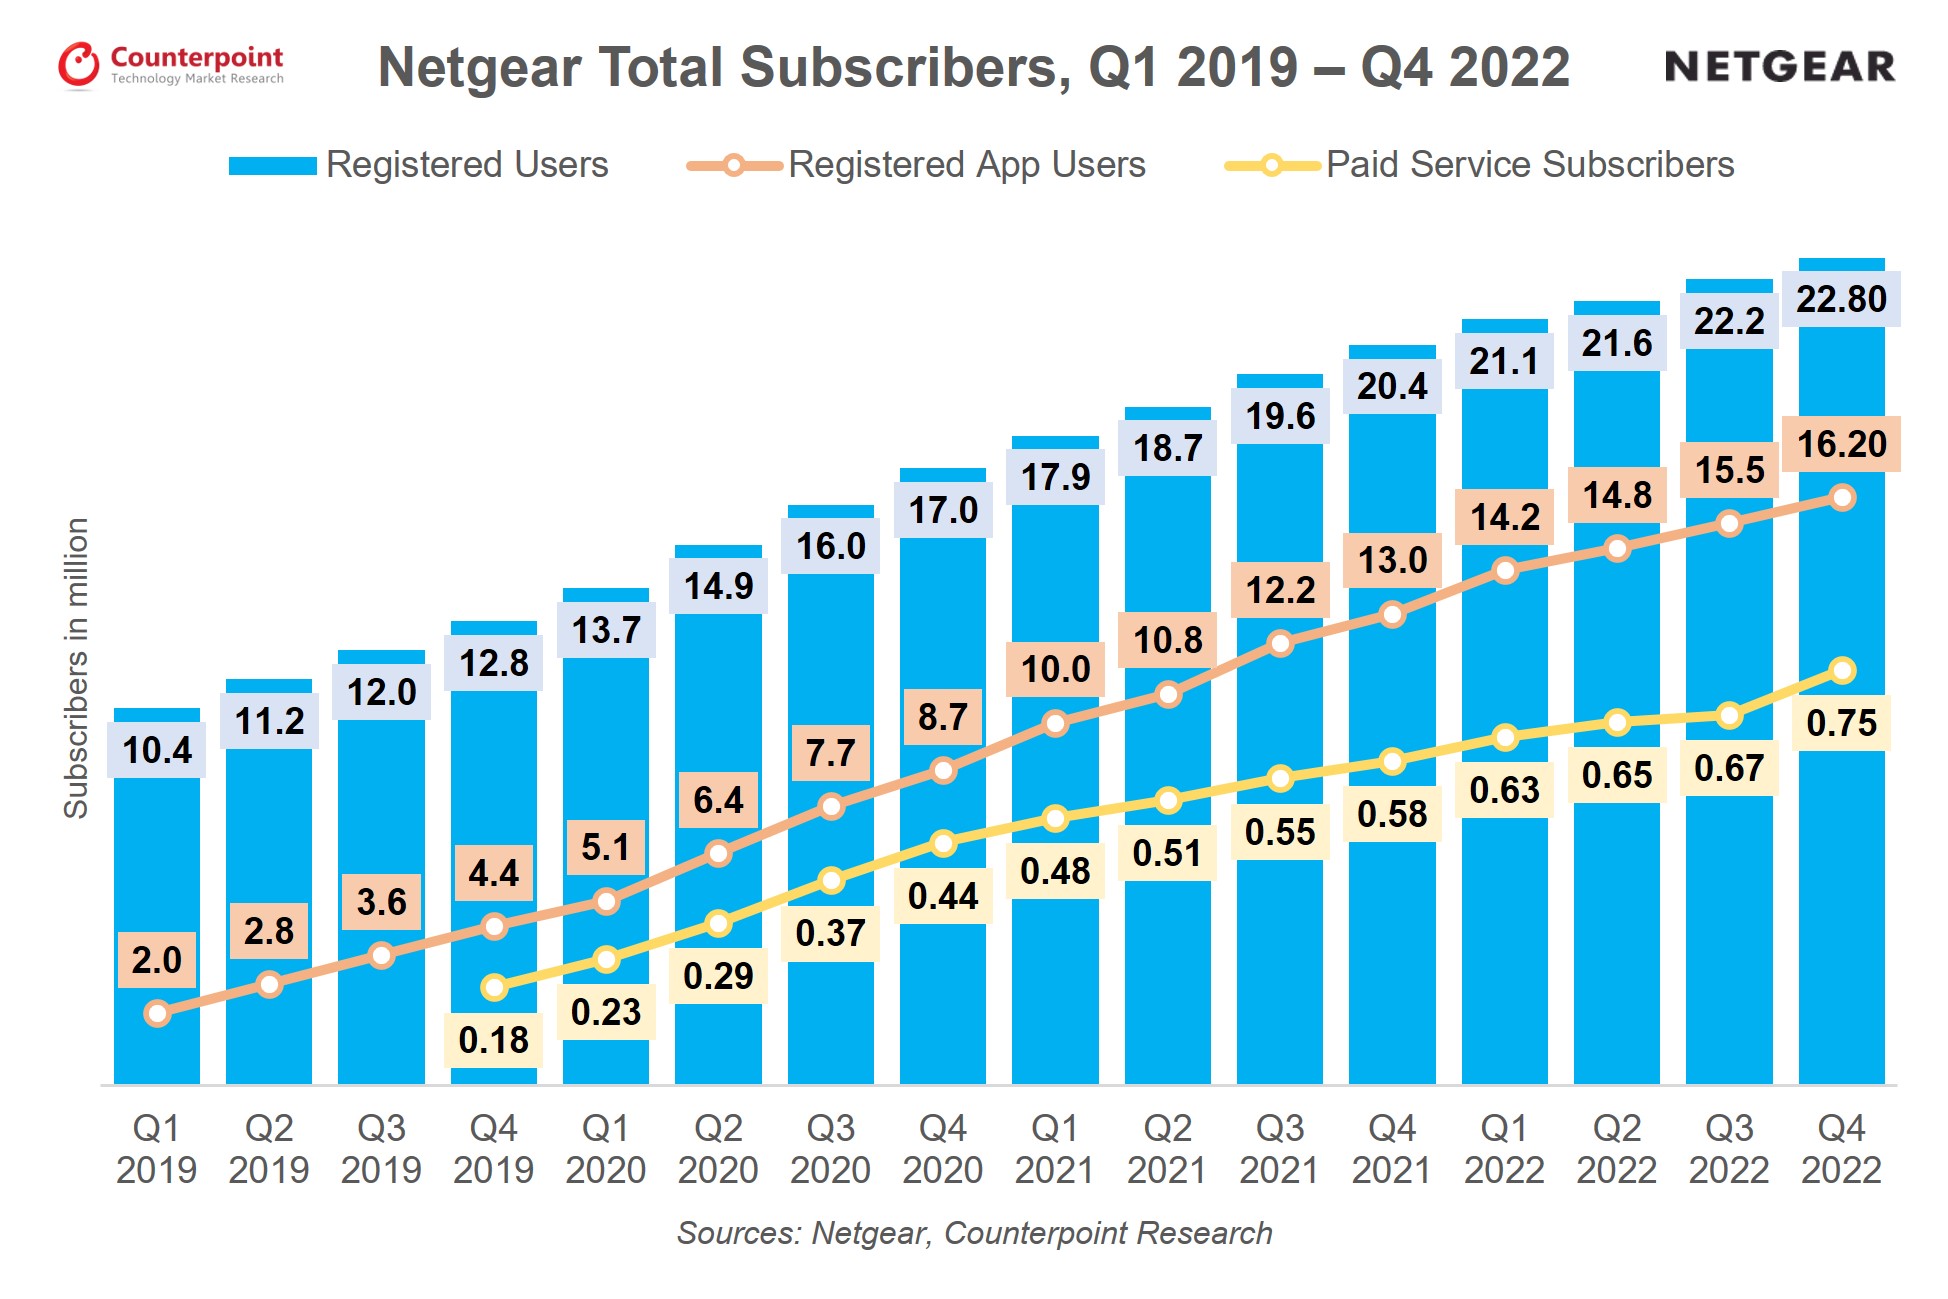 Netgear Total Subscribers Q1 2019-Q4 2022, Counterpoint Research